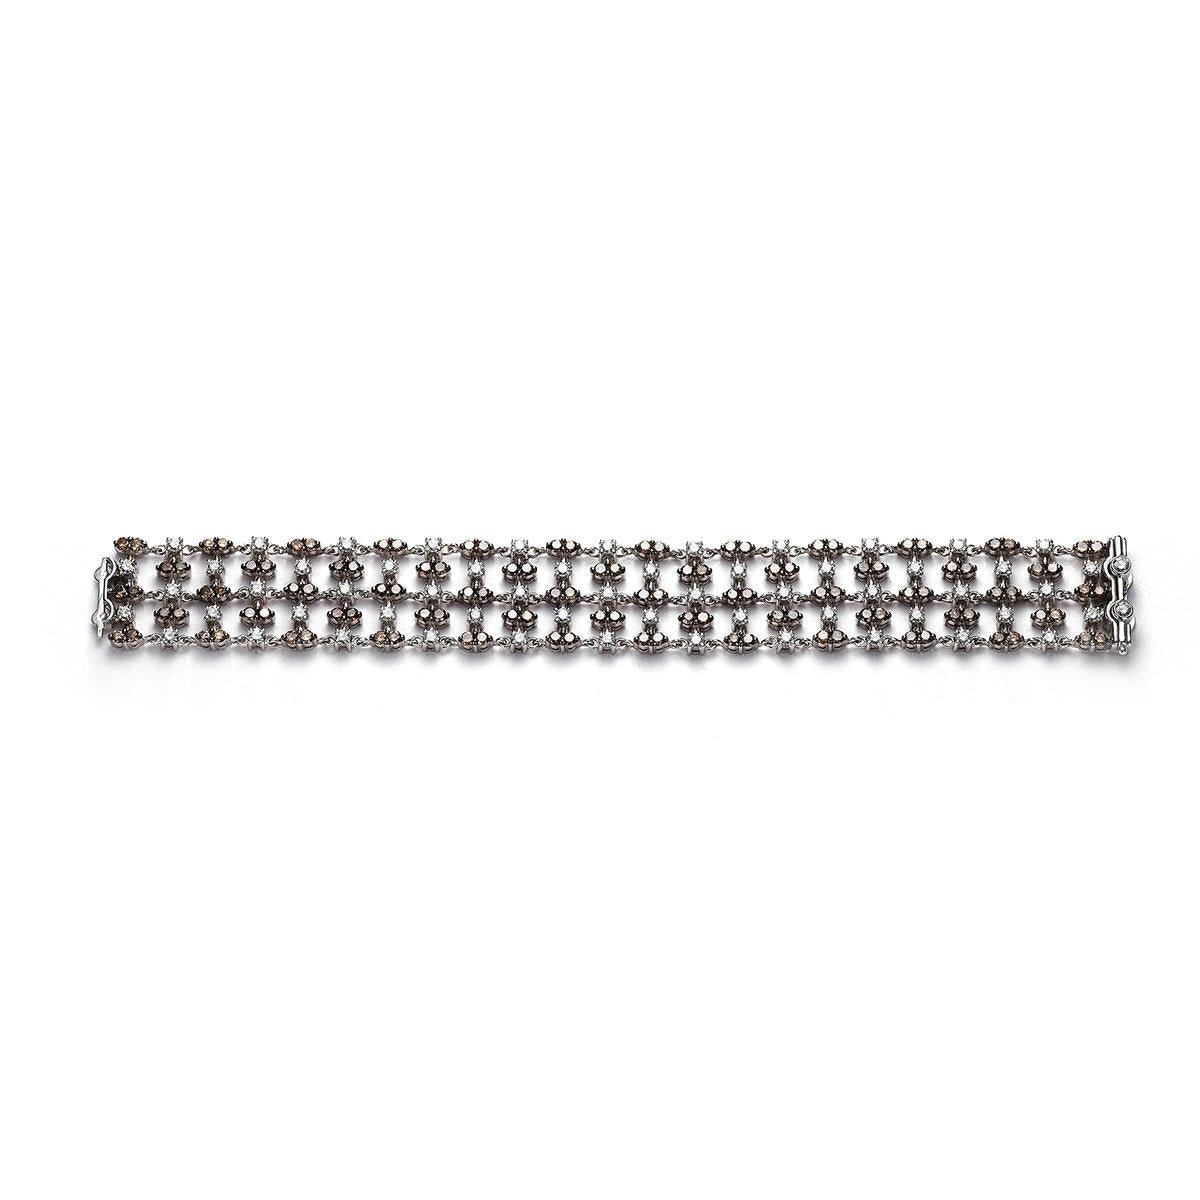 Bracelet in 18kt white gold set with 116 browns diamonds 8.35 cts        
and 59 diamonds 4.83 cts